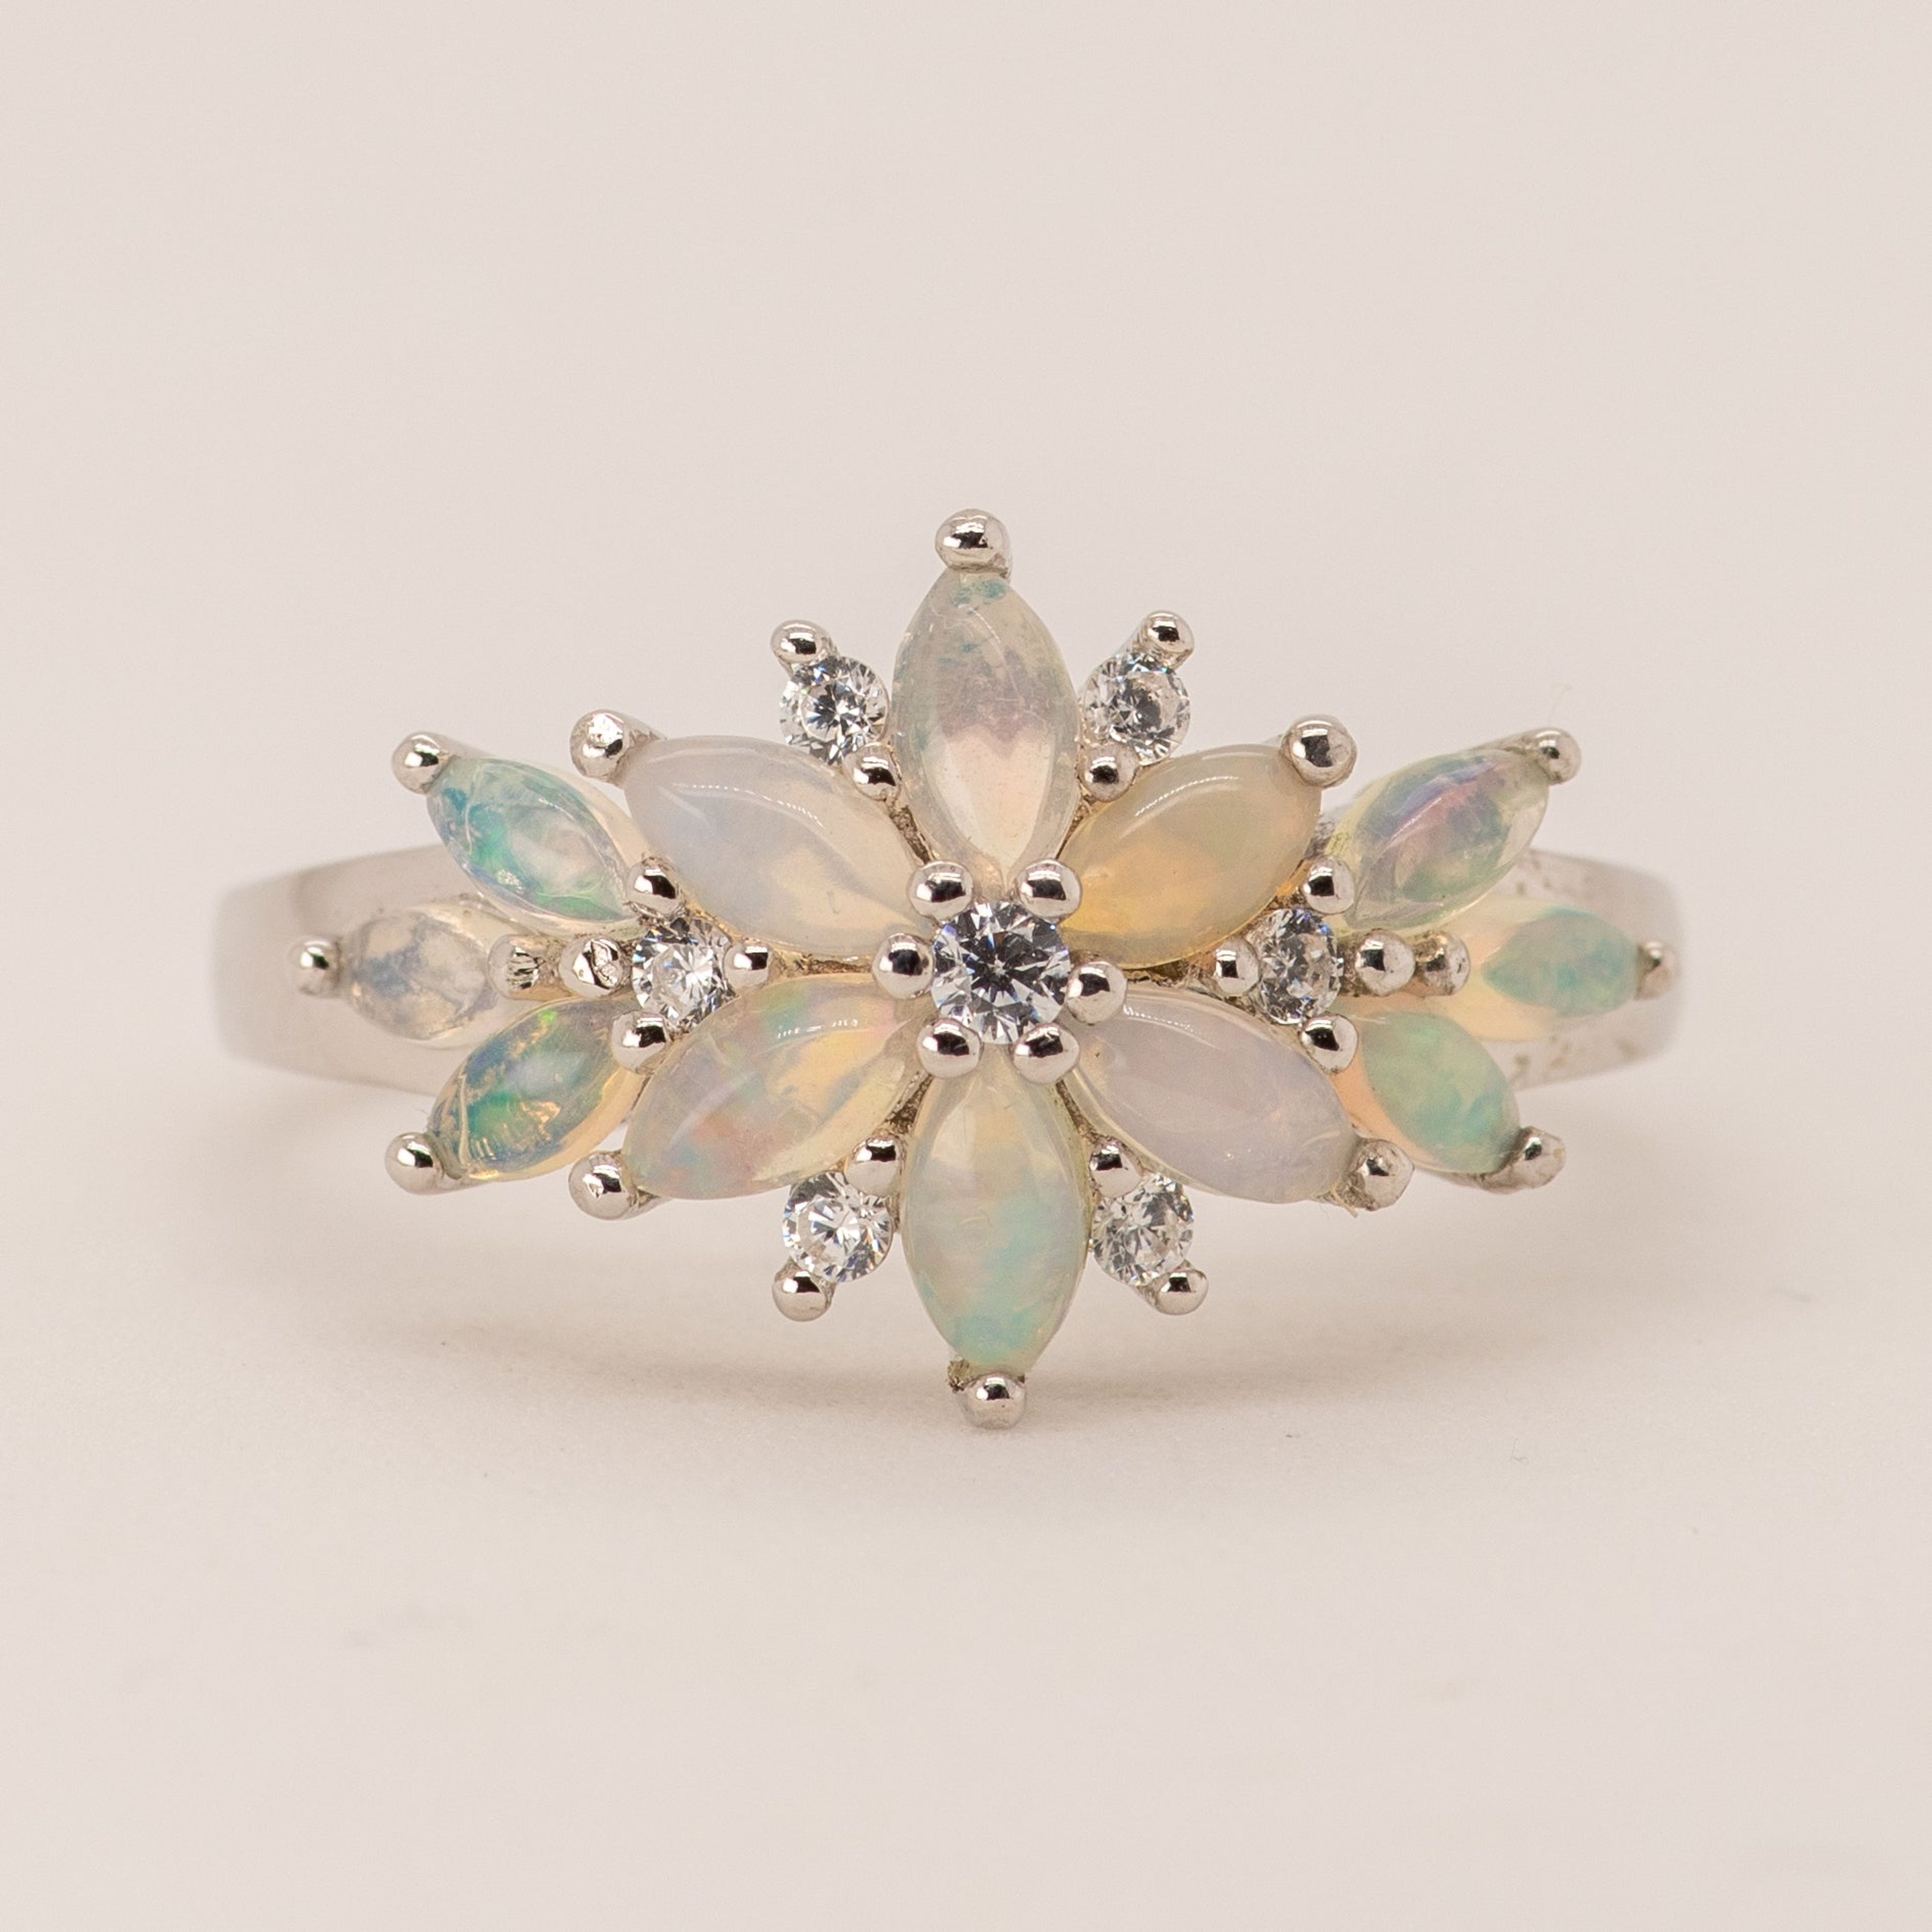 Ethiopian Opal Ring in Sterling Silver - Handcrafted with Genuine Opal Stone